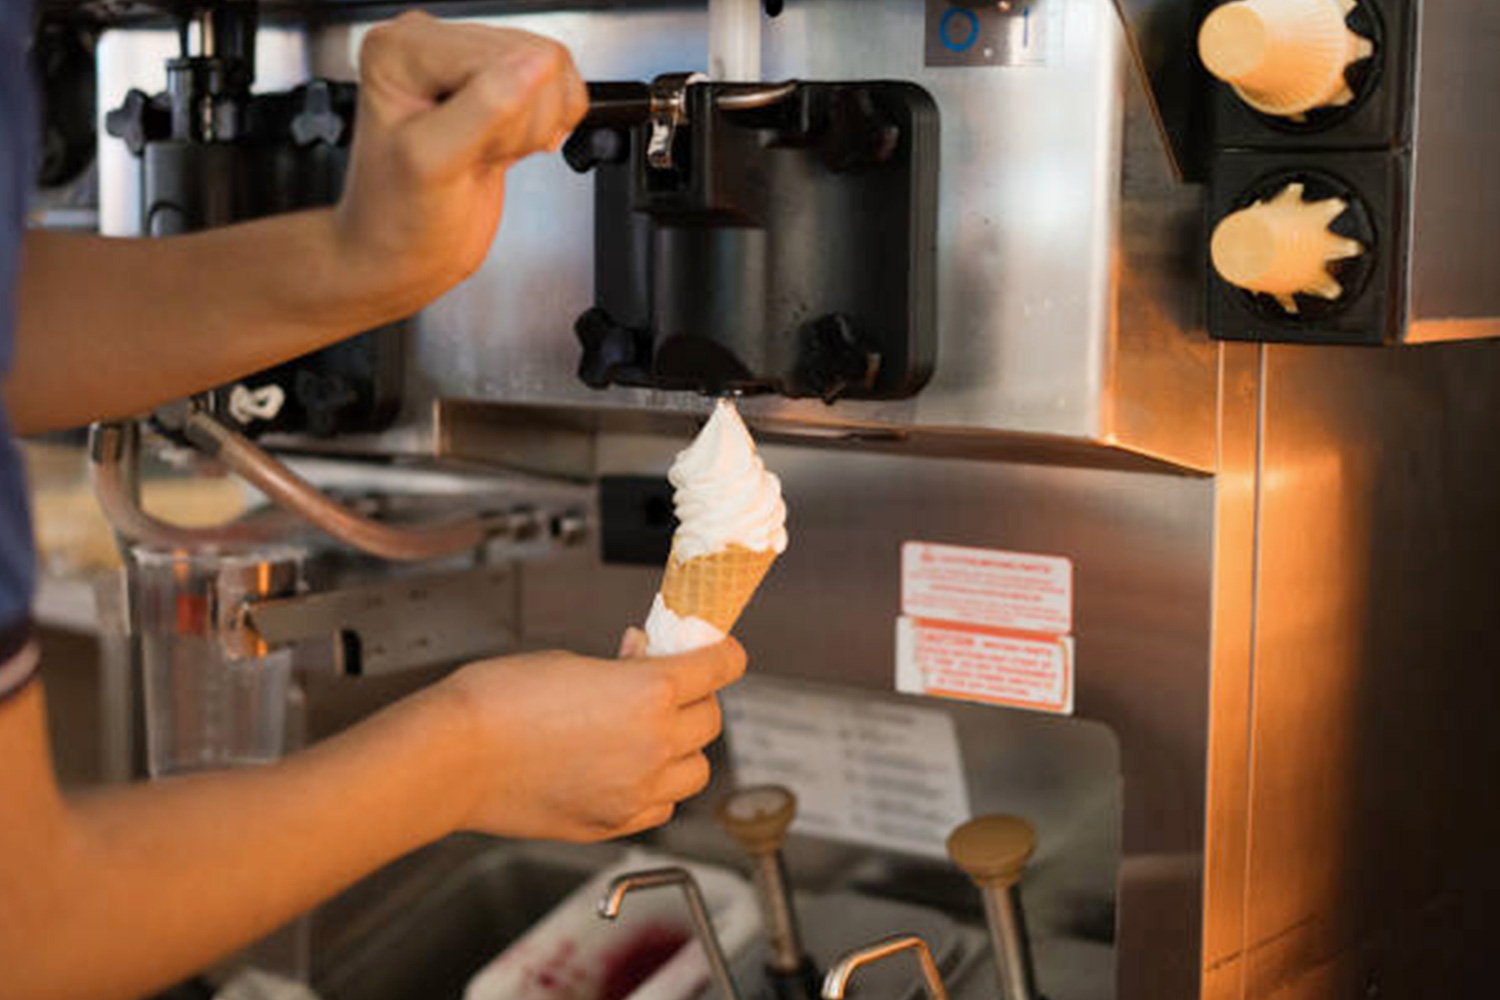 McDonald’s Ice Cream Machines To Be Fixed As Updated by FTC and DOJ Team